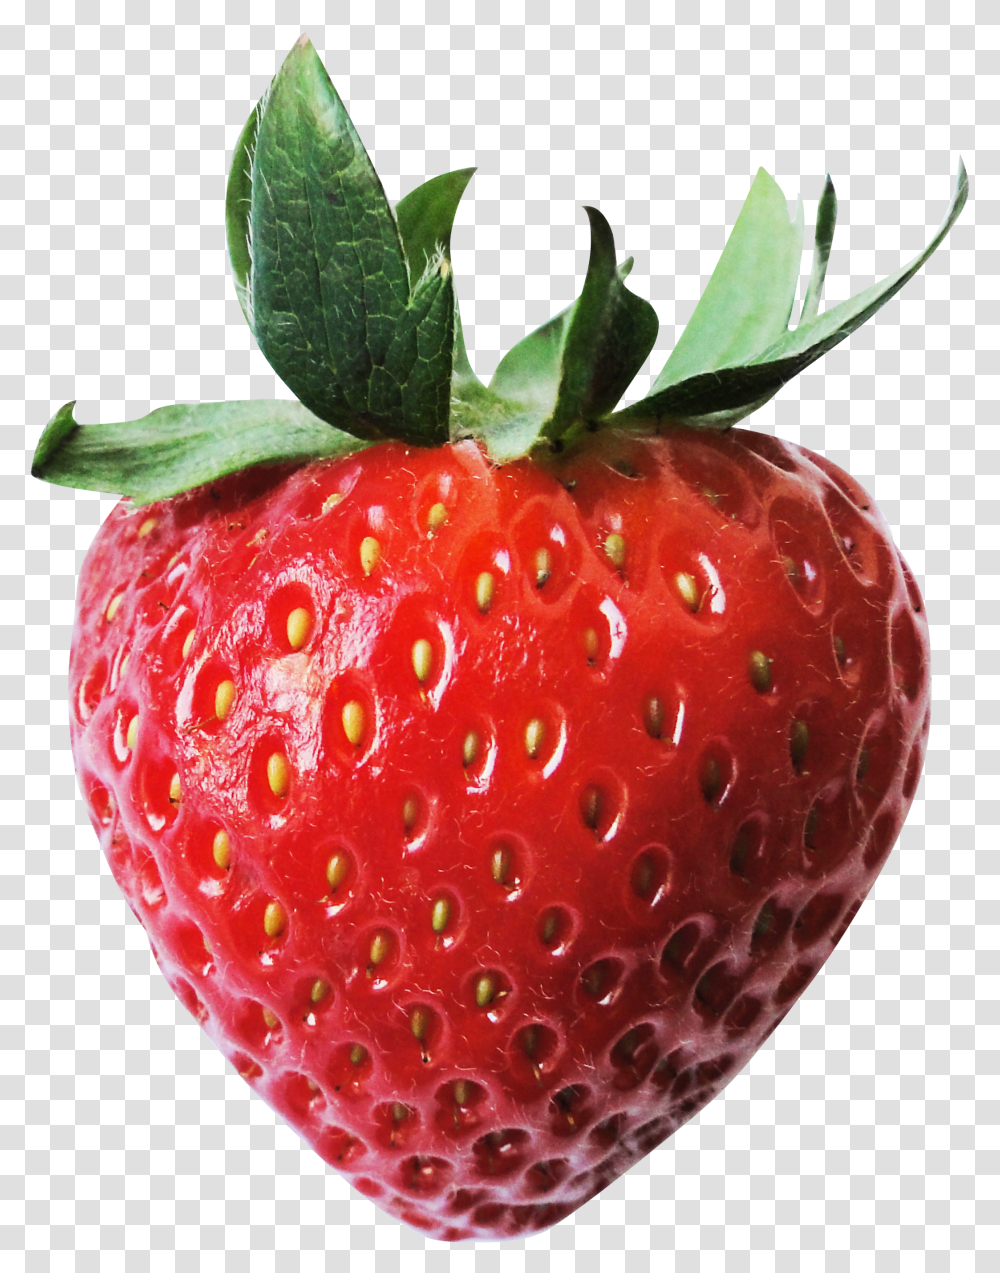 Download Red Juicy Strawberry Image People See Different Colors Transparent Png